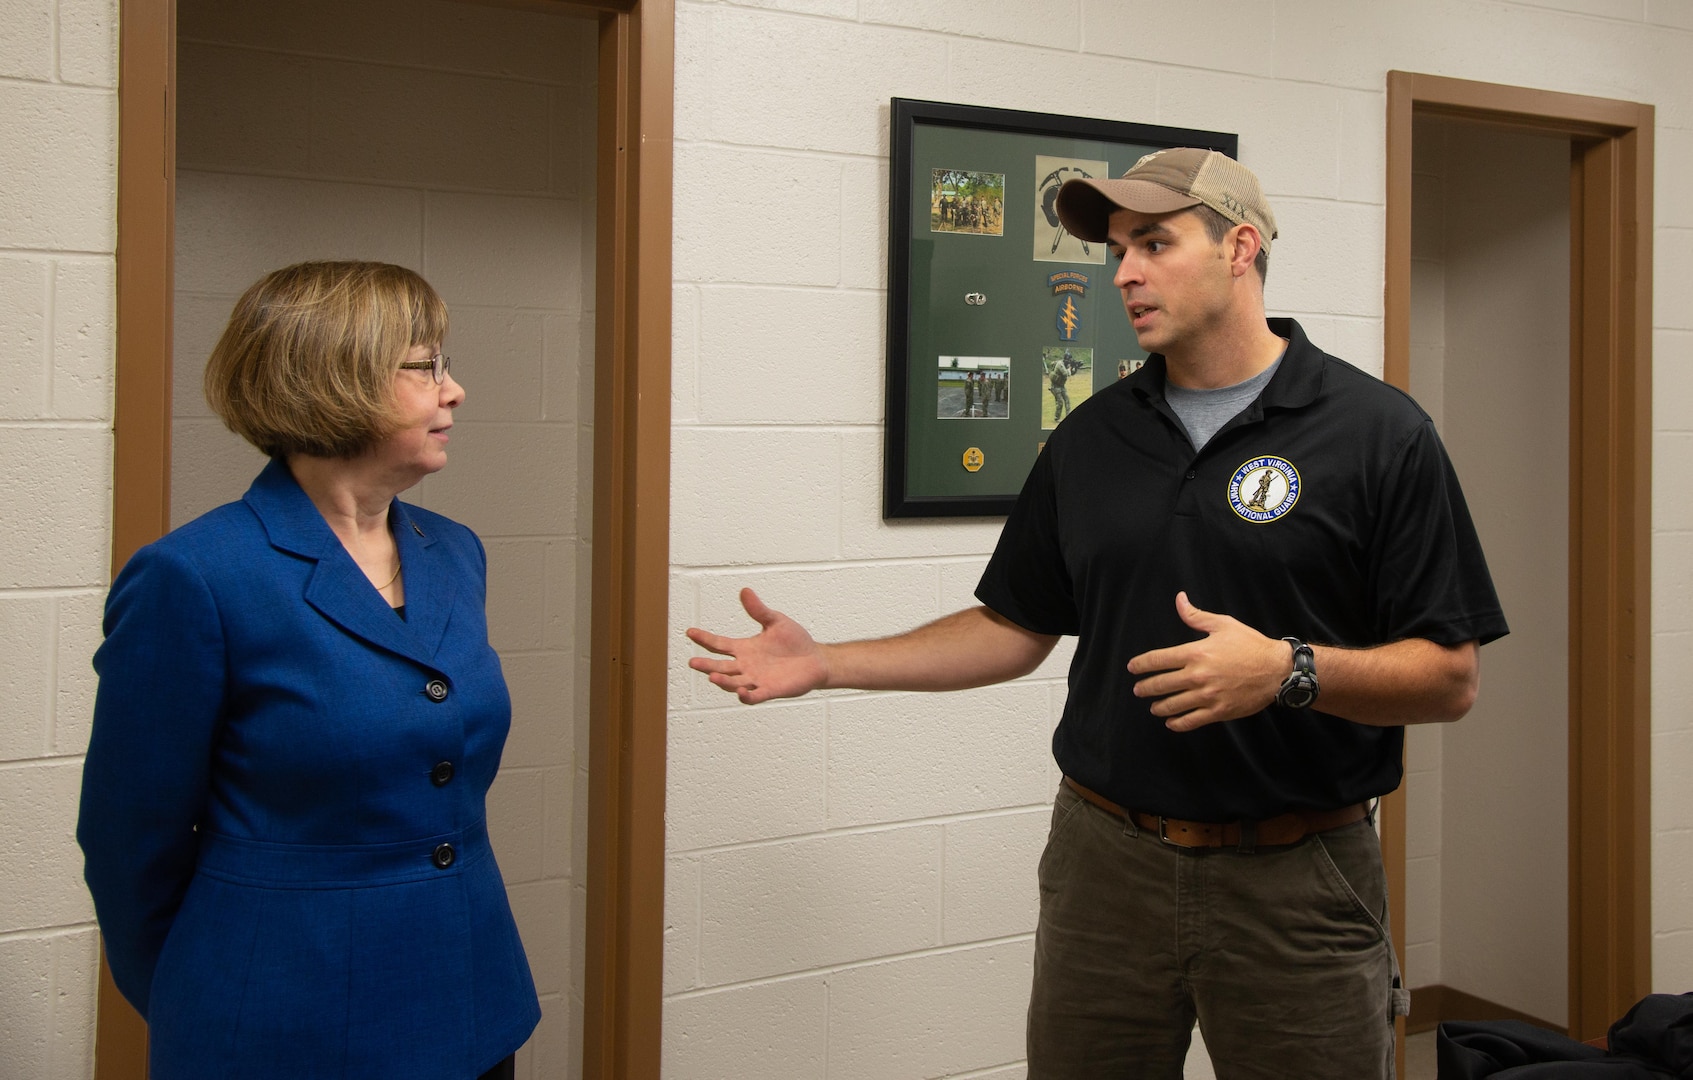 Bluefield State College President Marsha Krotseng speaks with Sgt. 1st Class Teddy Scouras, a recruiter for the West Virginia Army National Guard, inside the new recruiting office in the W. Paul Cole, Jr. School of Business/Mahood Hall Nov. 2, 2018 in Bluefield, West Virginia. The recruiting office at Bluefield State marks the newest location for the WVARNG in the southernmost part of the state, the only one of which is at a higher education institution. (U.S. Air National Guard photo by Capt. Holli Nelson)